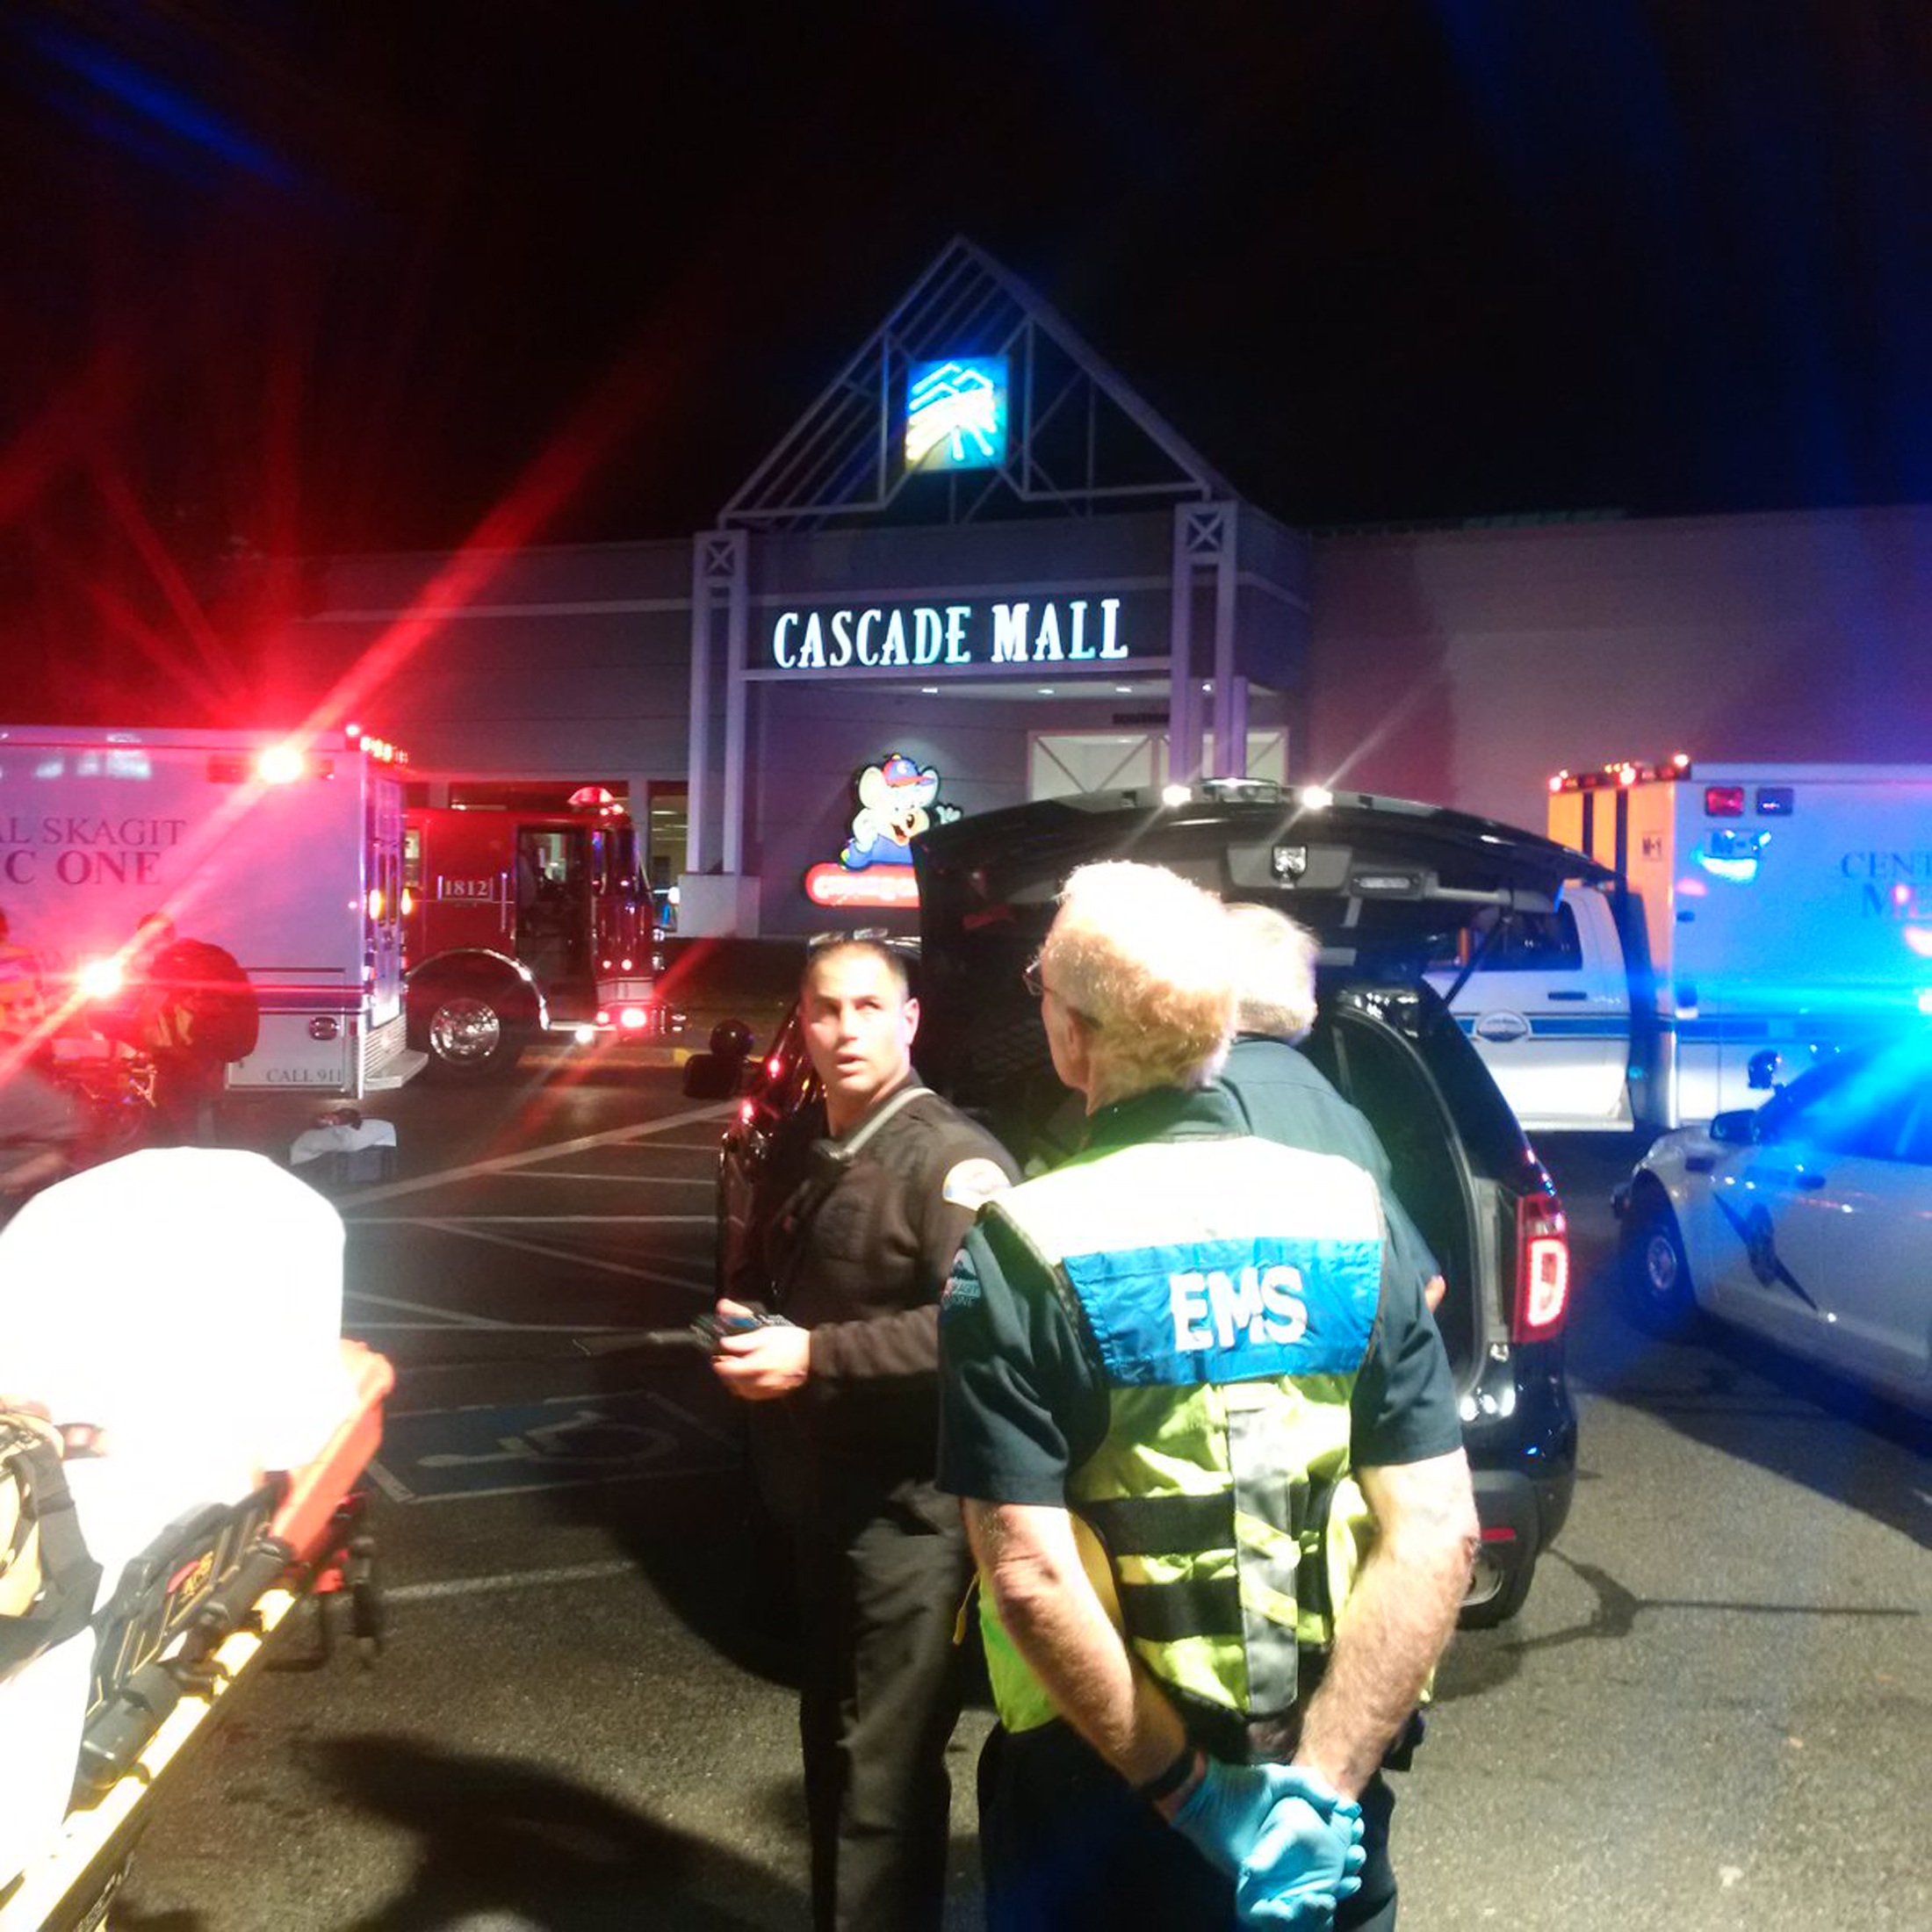 Medics wait to gain access to the Cascade Mall after four people were shot dead in Burlington, Washington, U.S. September 24, 2016. Sgt Mark Francis/Washington State Patrol/Handout via Reuters ATTENTION EDITORS - THIS IMAGE WAS PROVIDED BY A THIRD PARTY. EDITORIAL USE ONLY. FOR EDITORIAL USE ONLY. NOT FOR SALE FOR MARKETING OR ADVERTISING CAMPAIGNS. THIS IMAGE HAS BEEN SUPPLIED BY A THIRD PARTY. IT IS DISTRIBUTED, EXACTLY AS RECEIVED BY REUTERS, AS A SERVICE TO CLIENTS